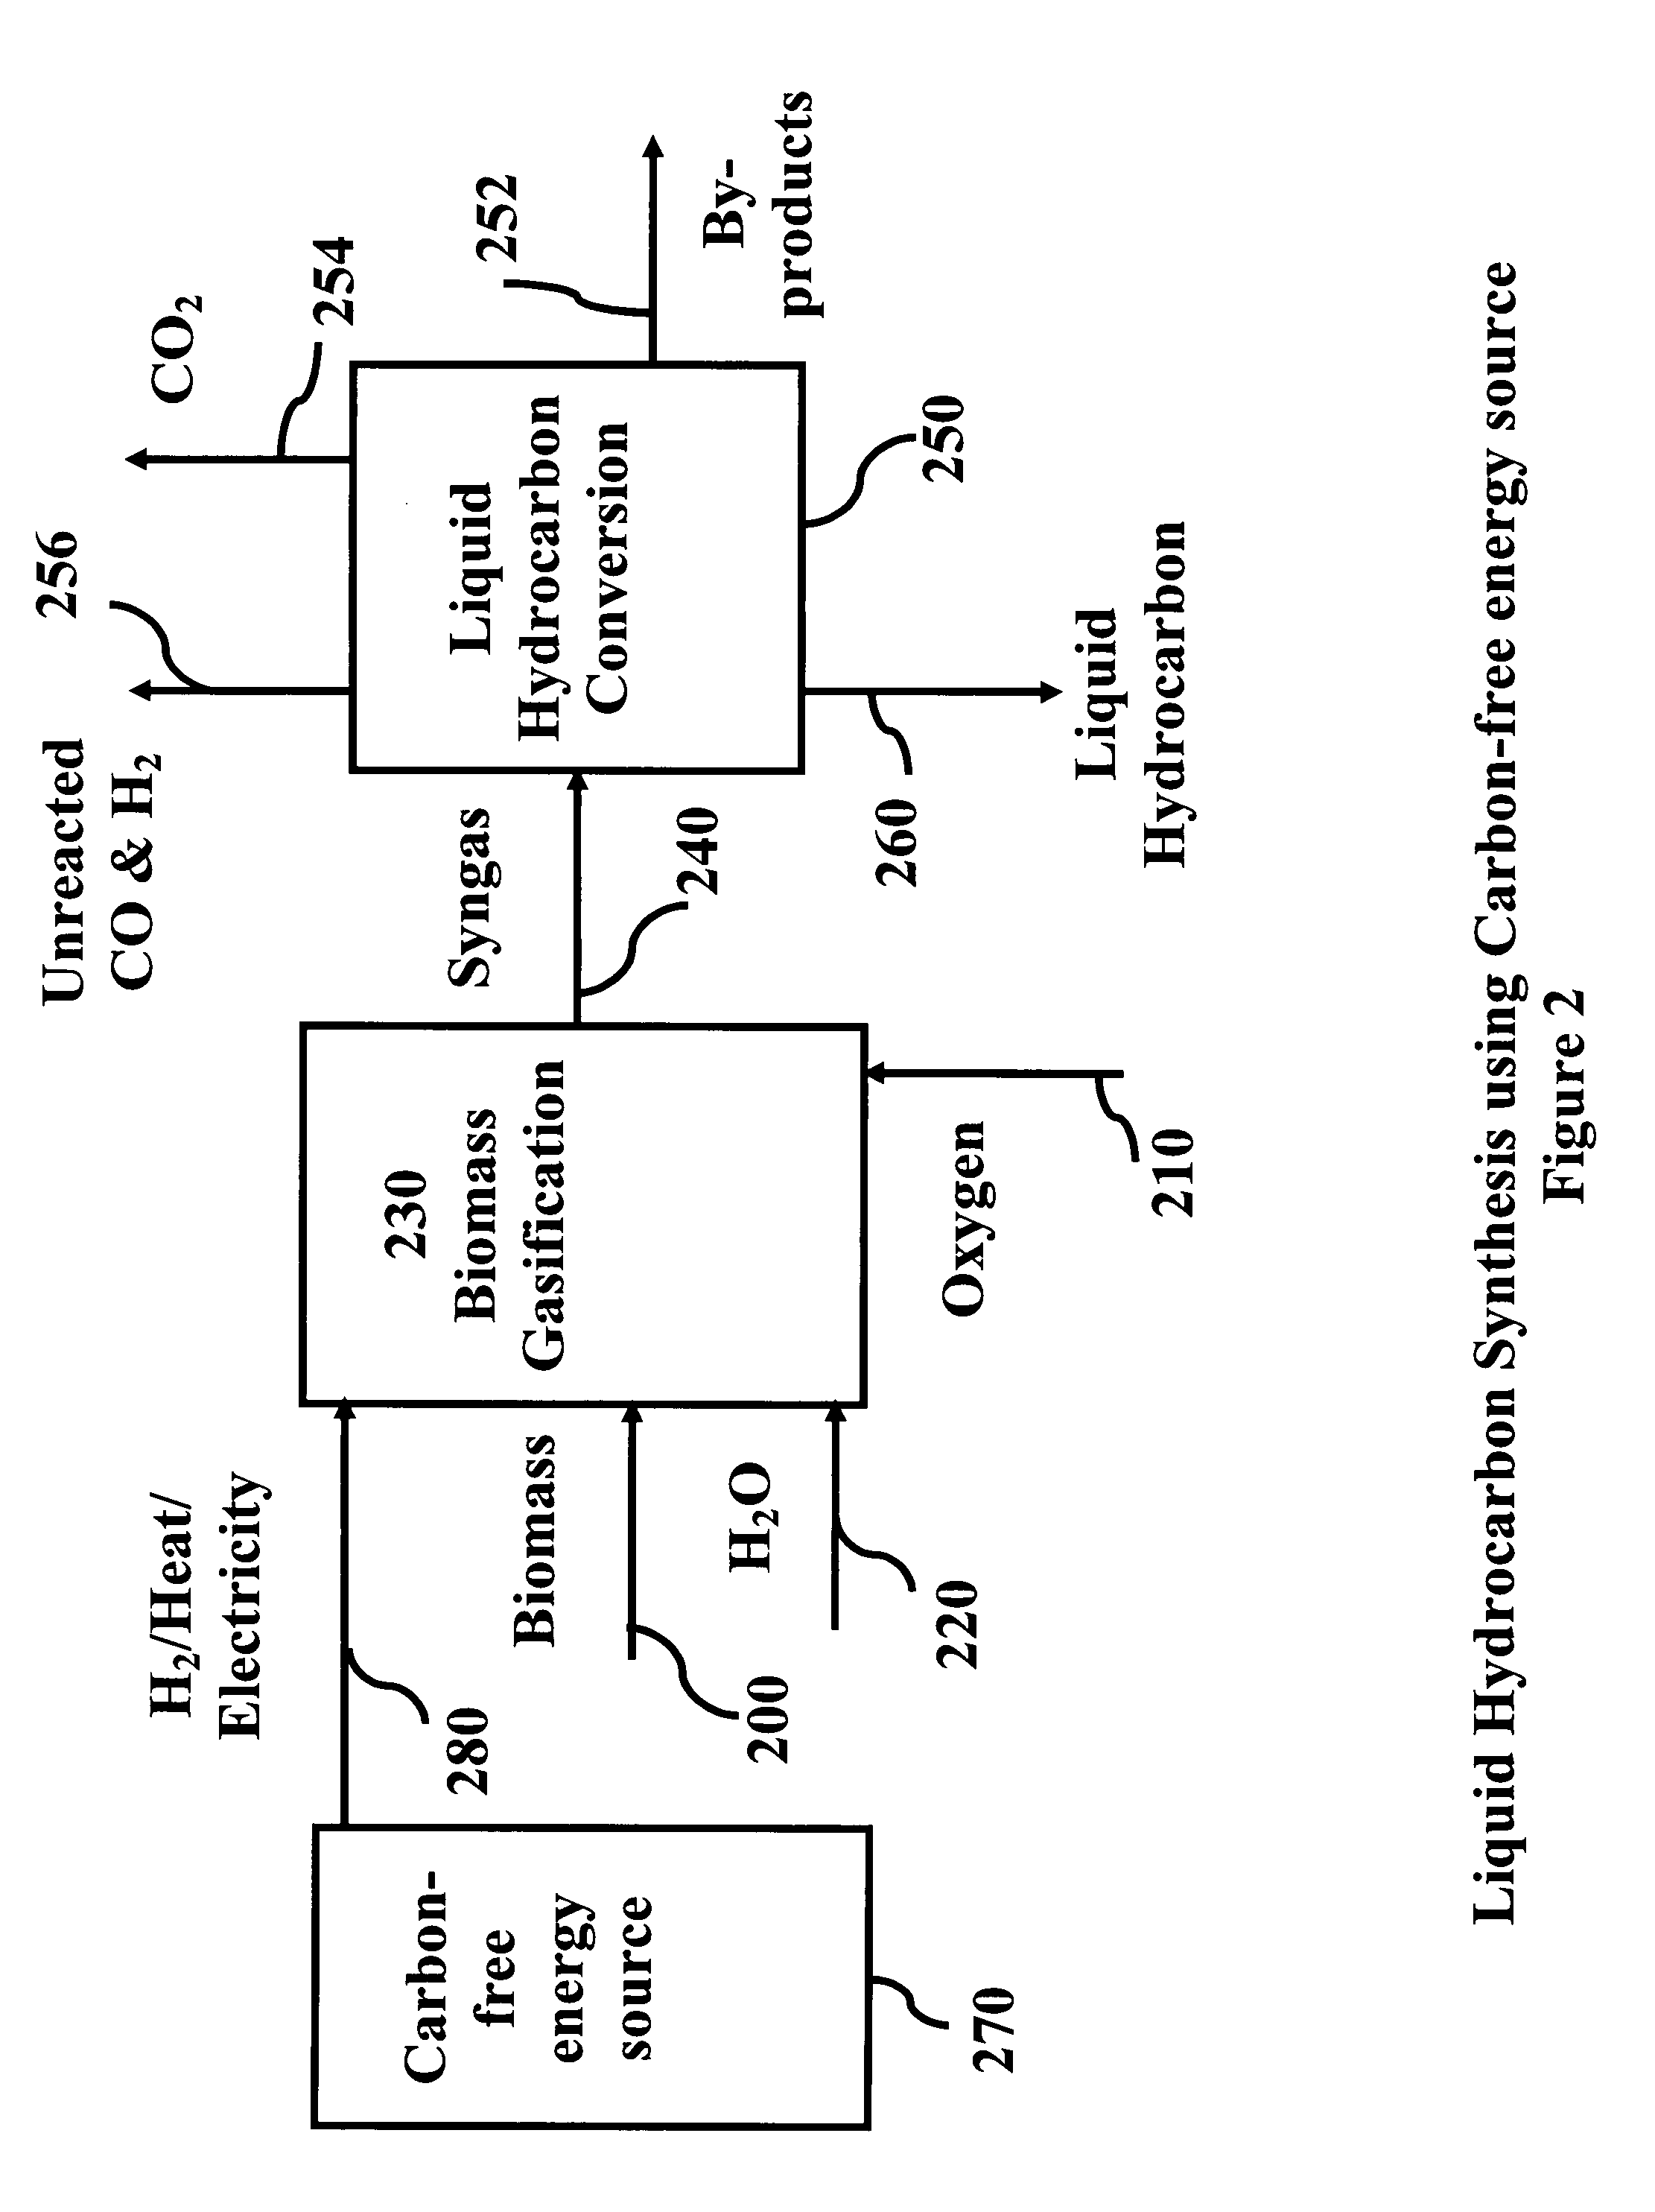 System and process for producing synthetic liquid hydrocarbon